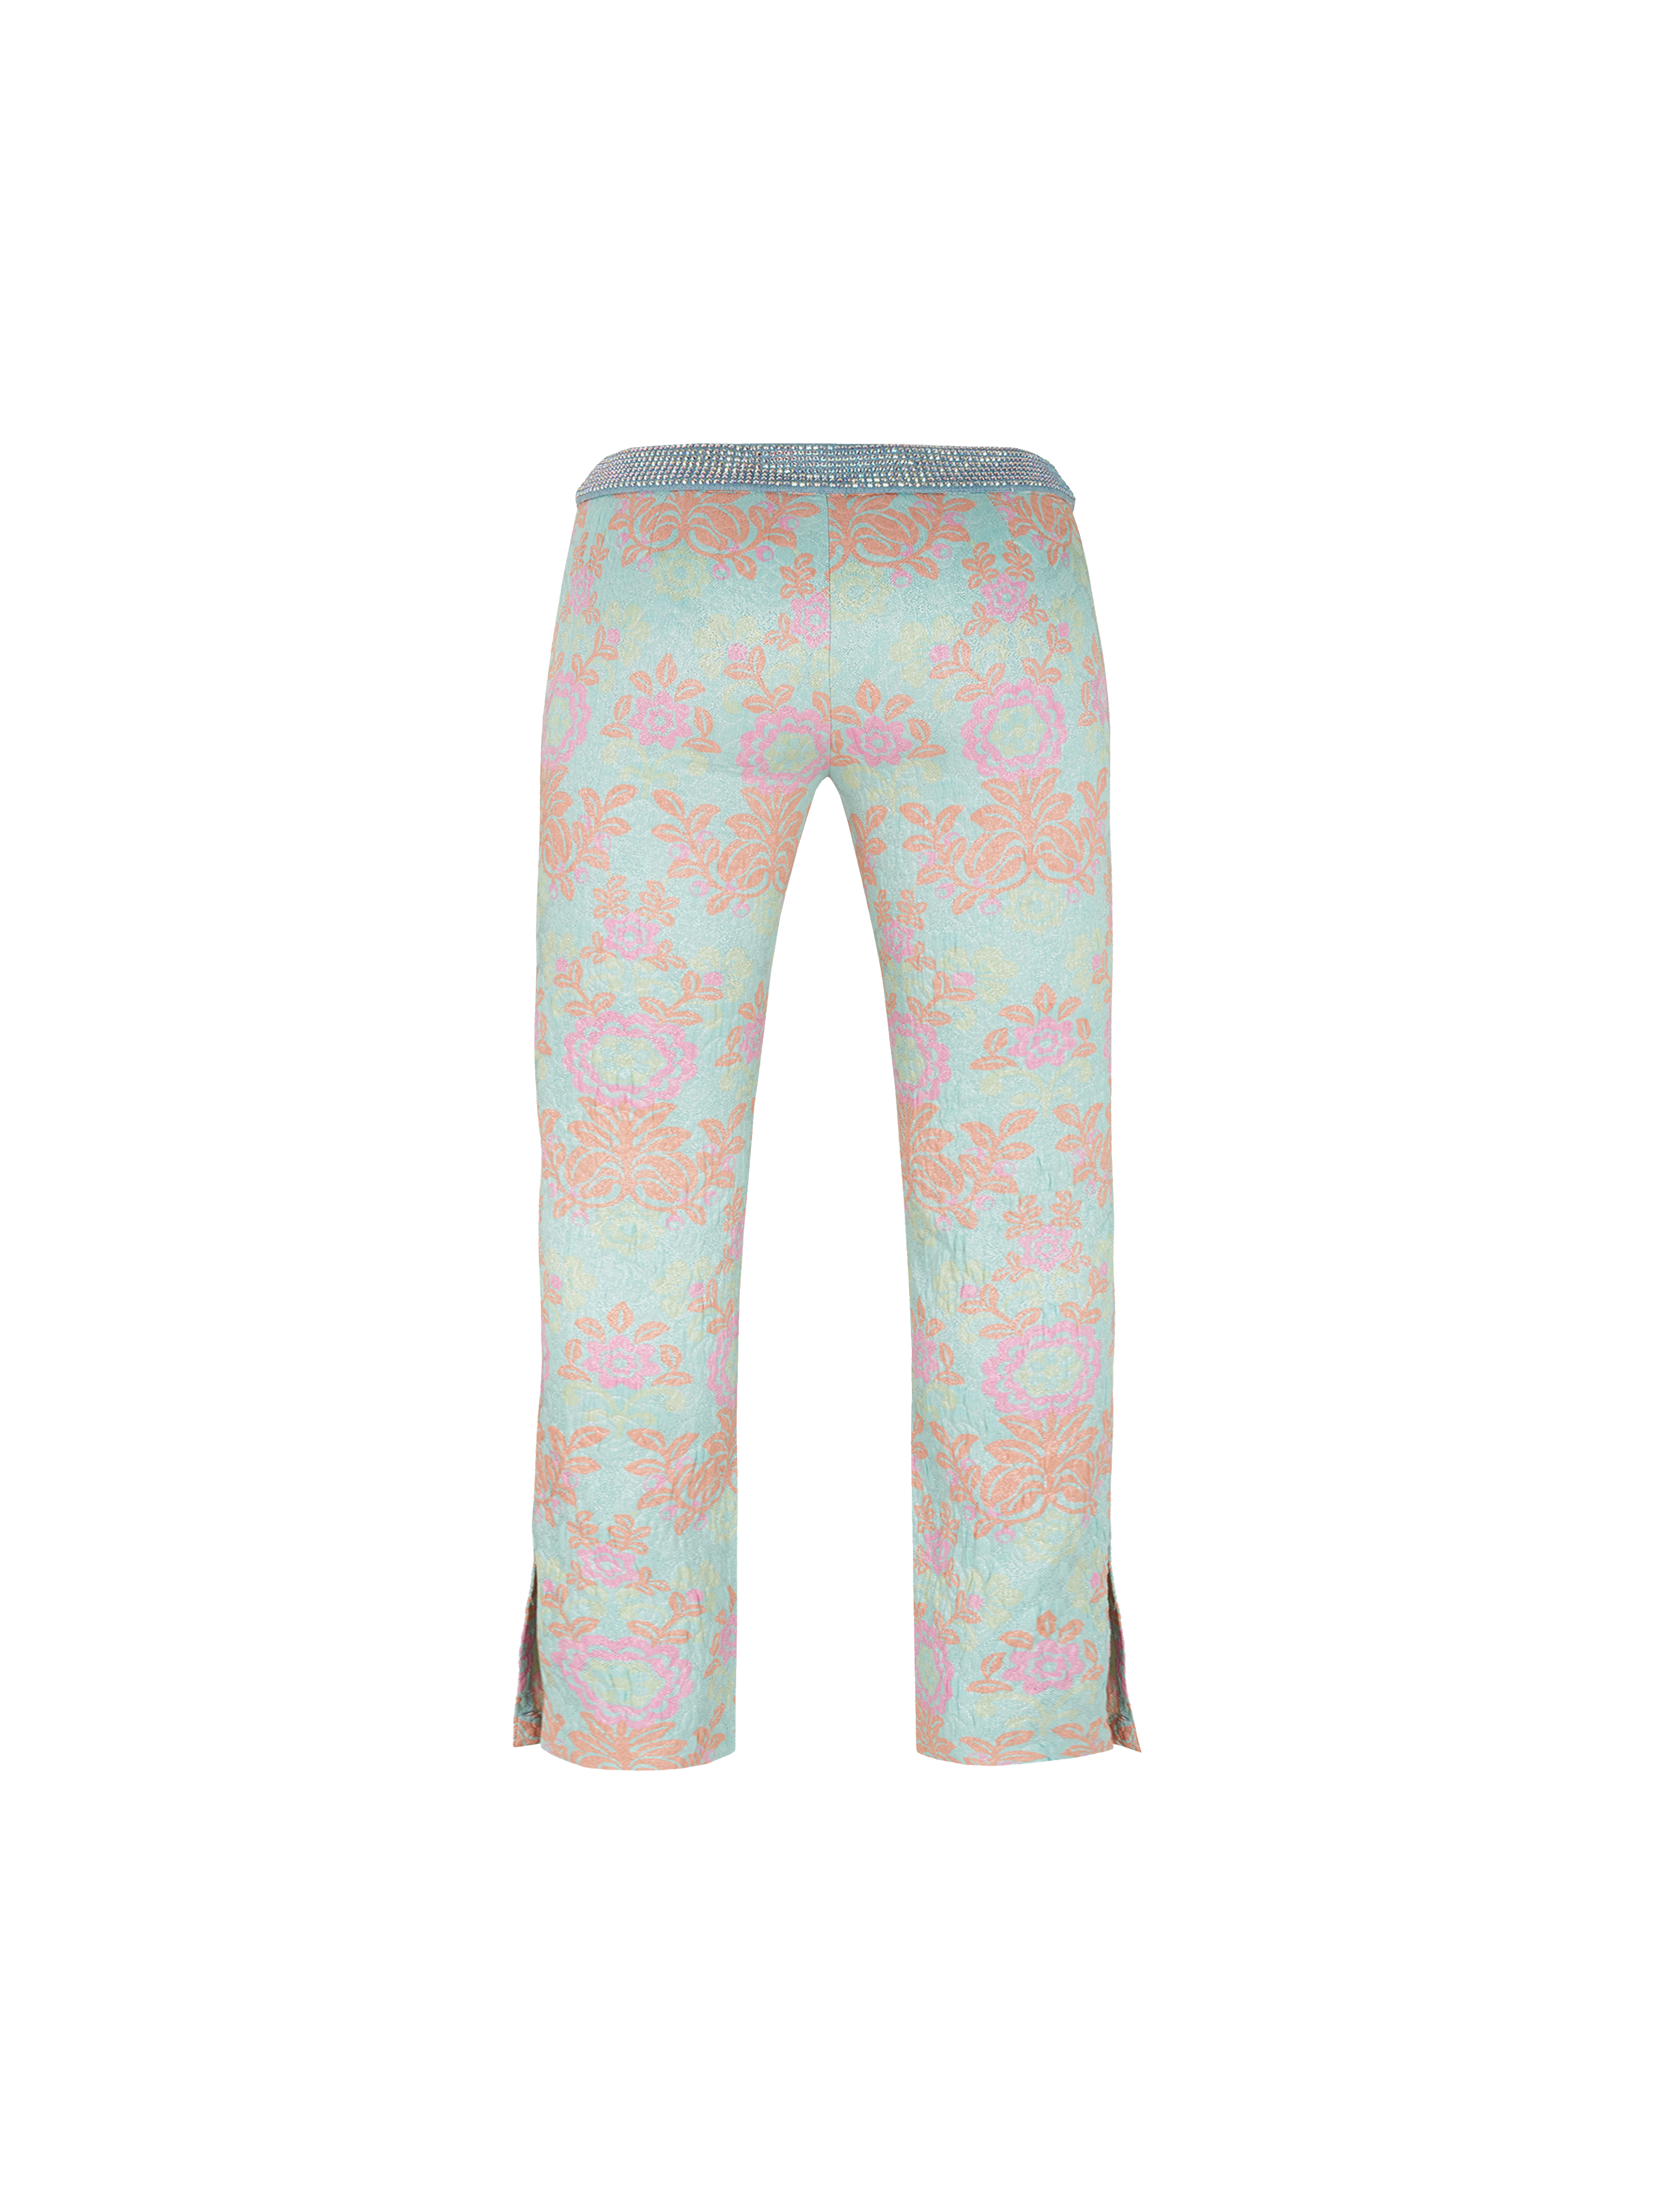 Dolce and Gabbana Spring 2000 Pastel Floral Trousers with Swarovski Crystals